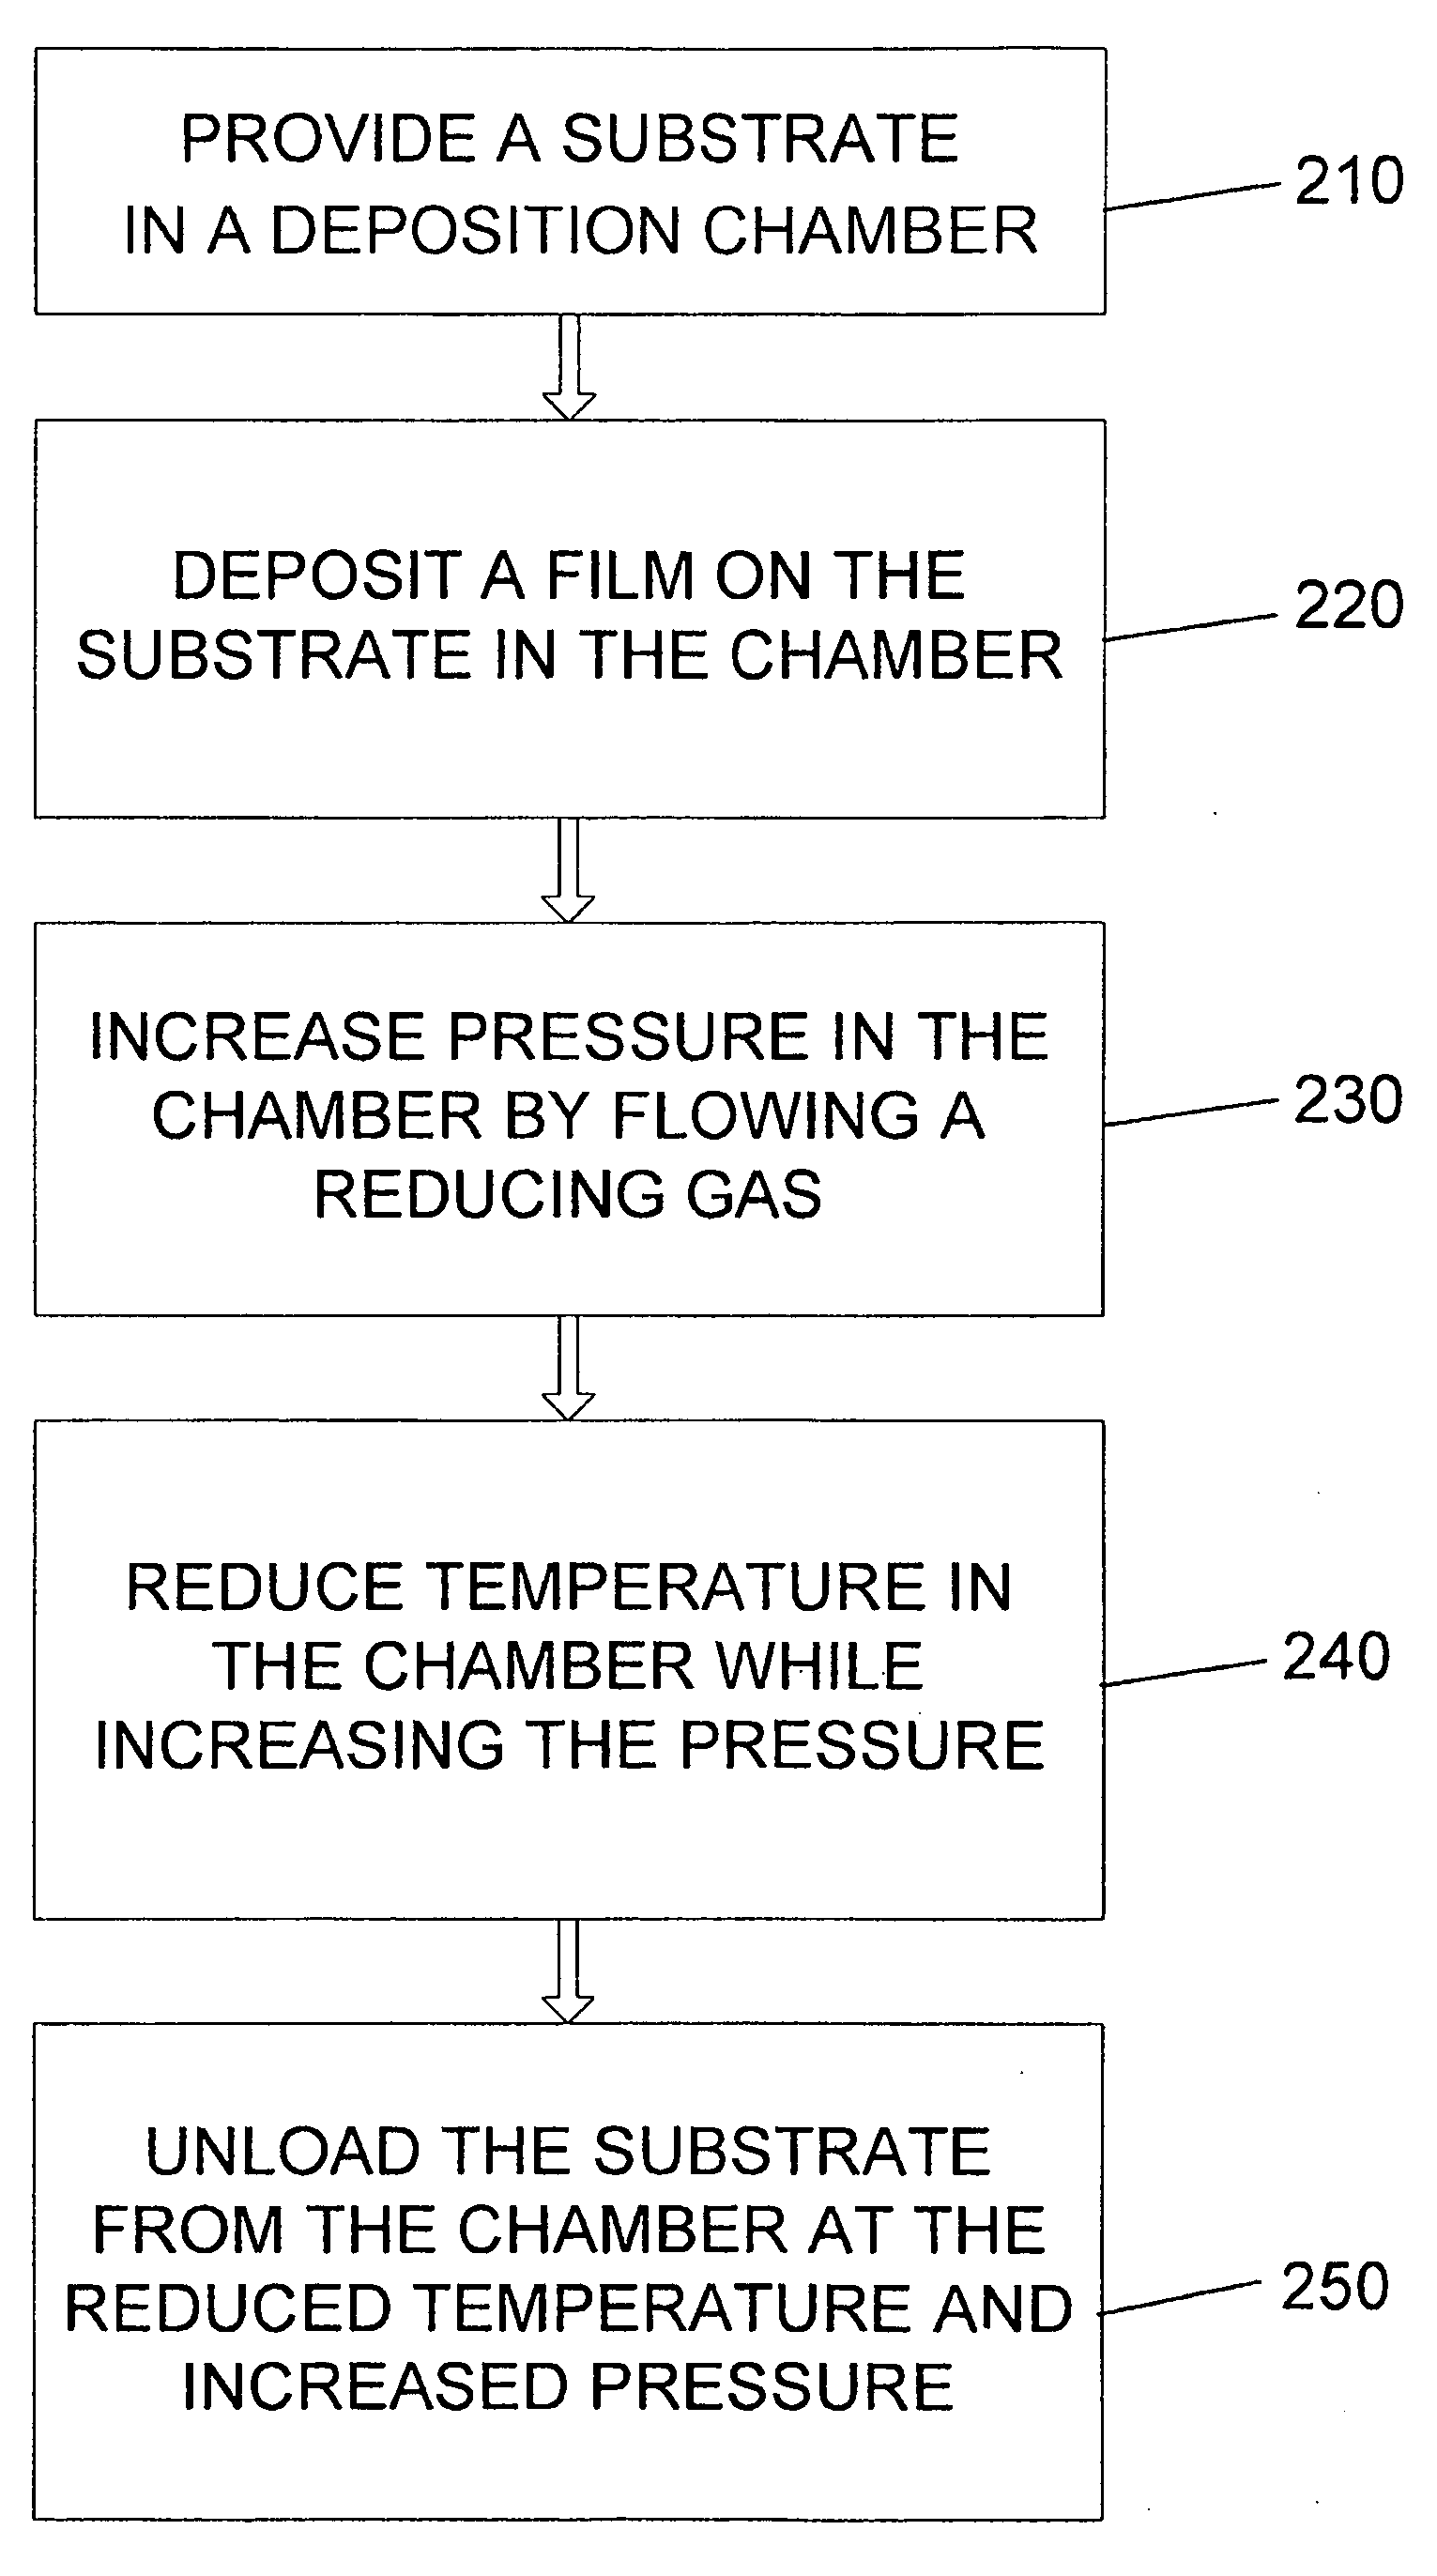 Protection of conductors from oxidation in deposition chambers